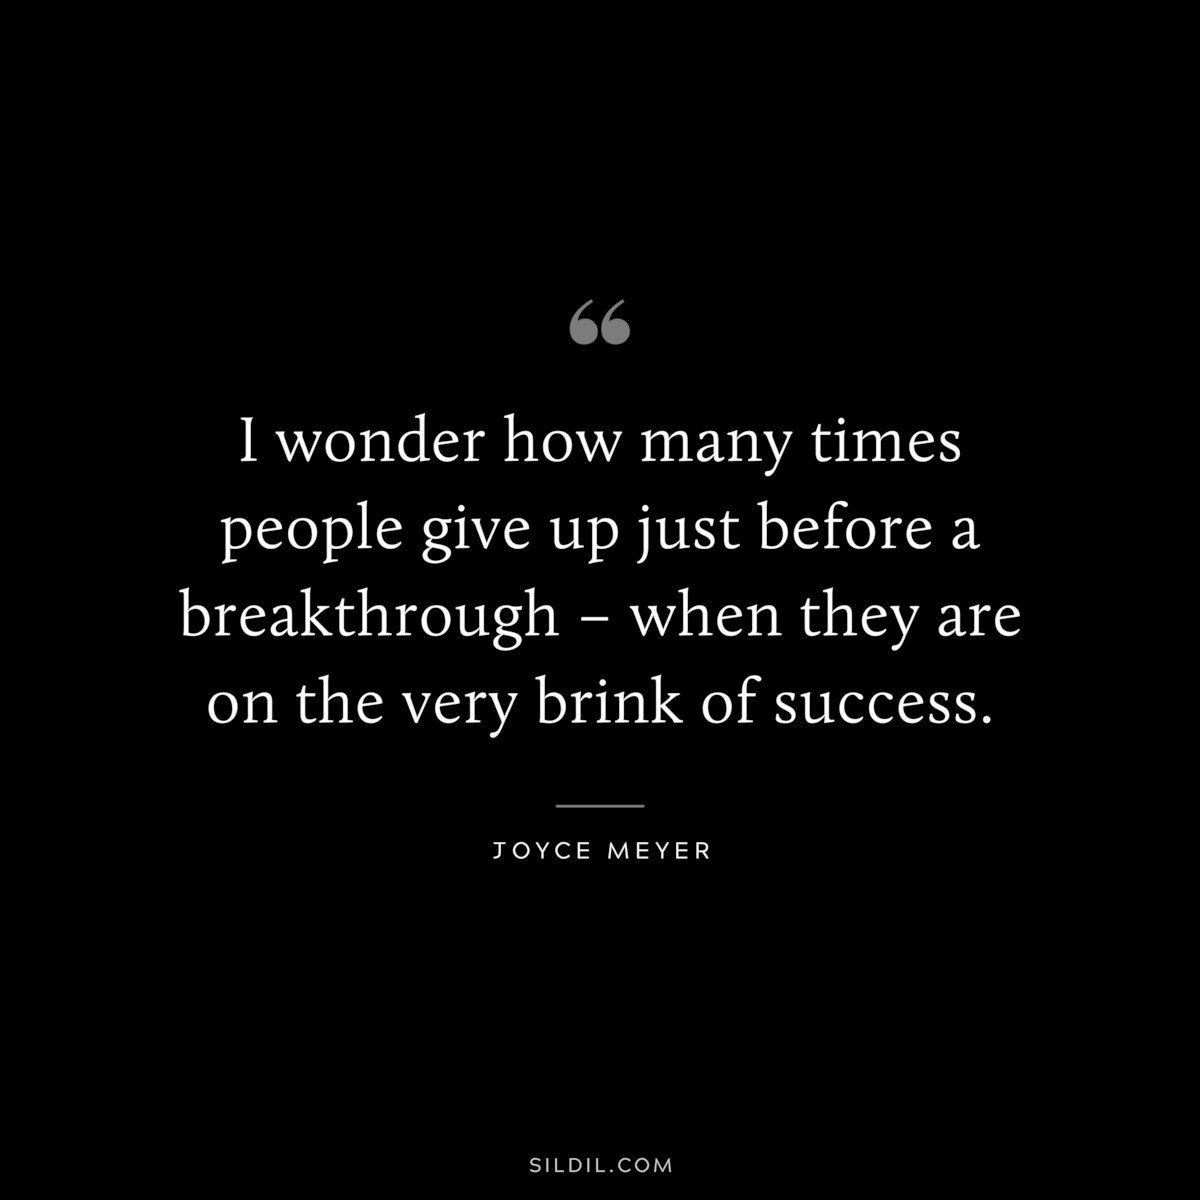 I wonder how many times people give up just before a breakthrough – when they are on the very brink of success. ― Joyce Meyer